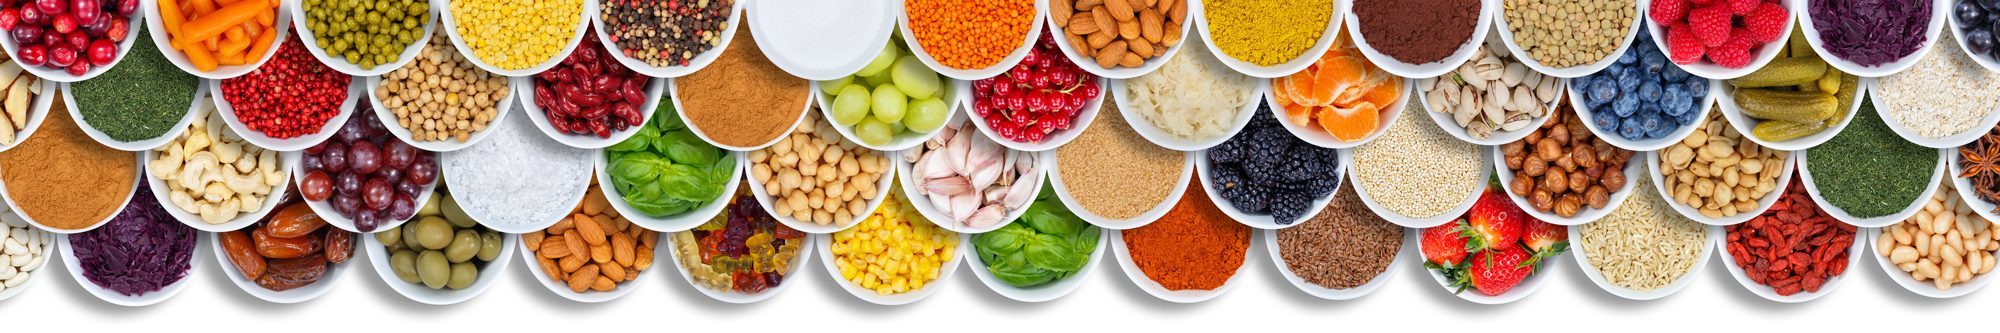 banner image of various food